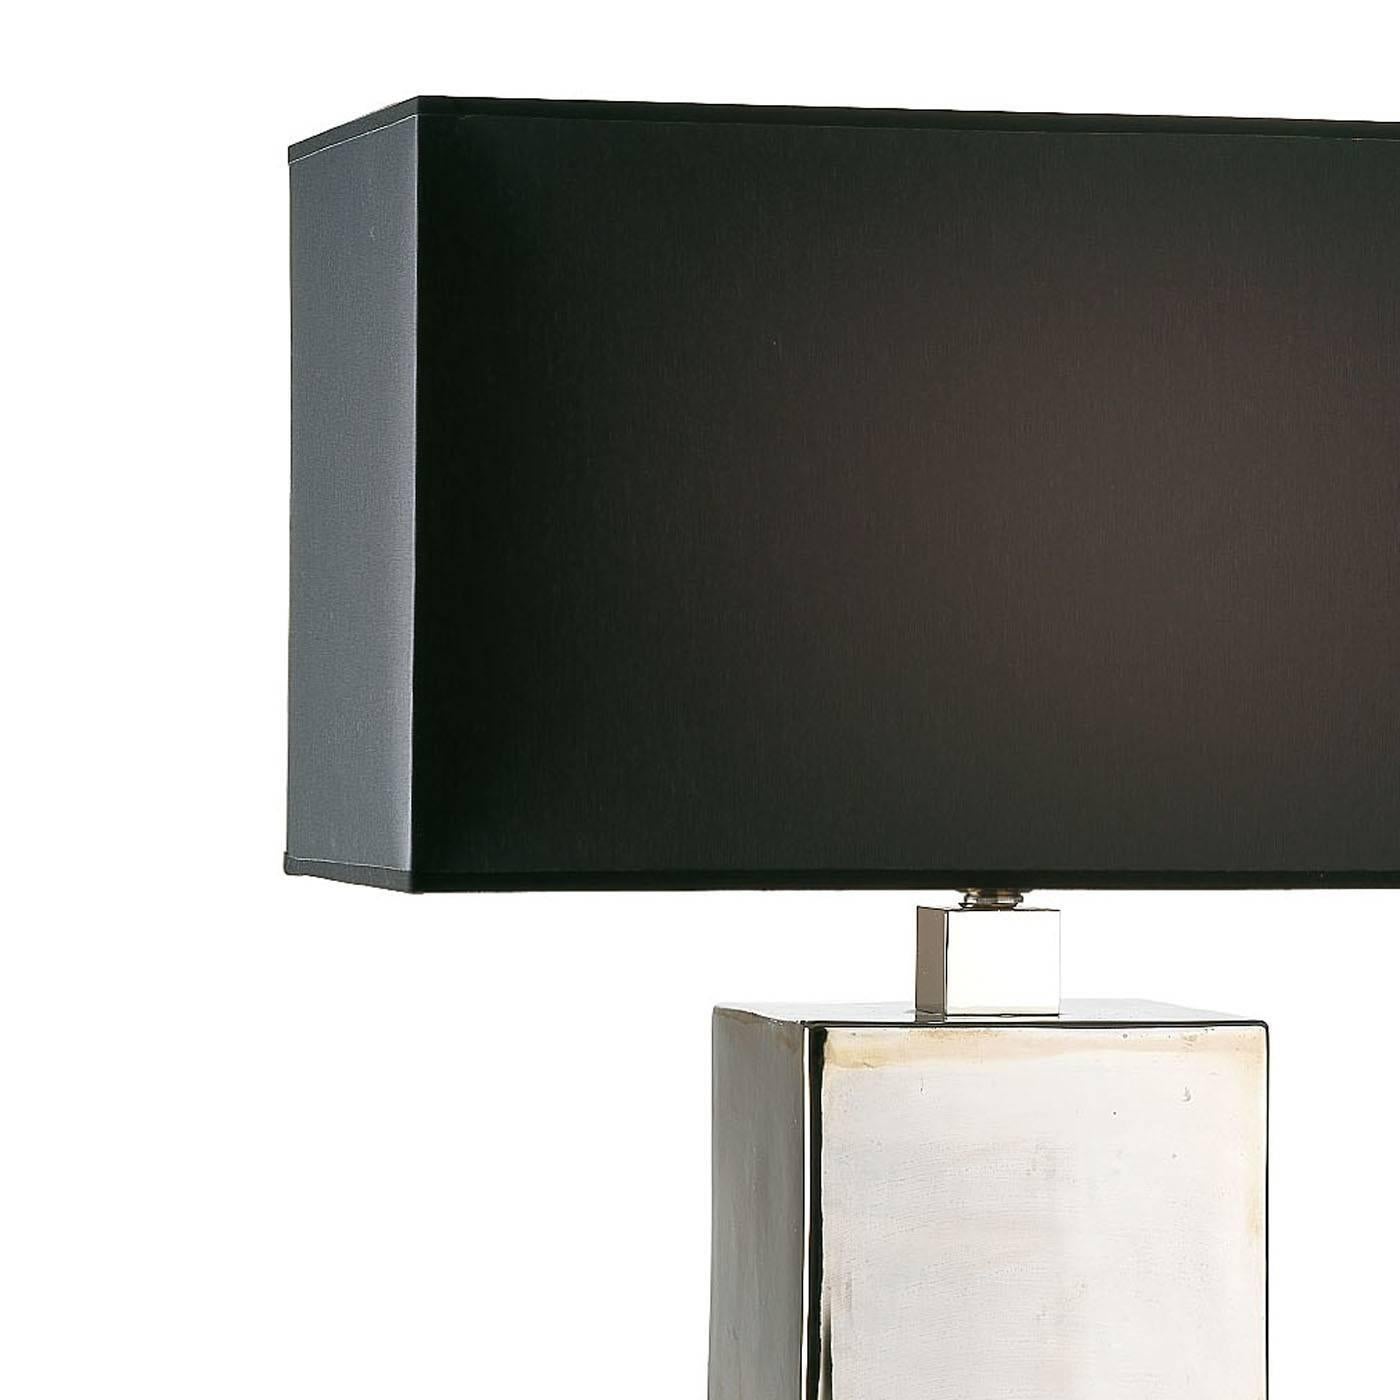 This elegant lamp exudes modern appeal thanks to its geometric silhouette, while the traditional materials used give it a classic charm, making this a timeless piece that can be a precious addition to any décor. The squared shaft, divided into three